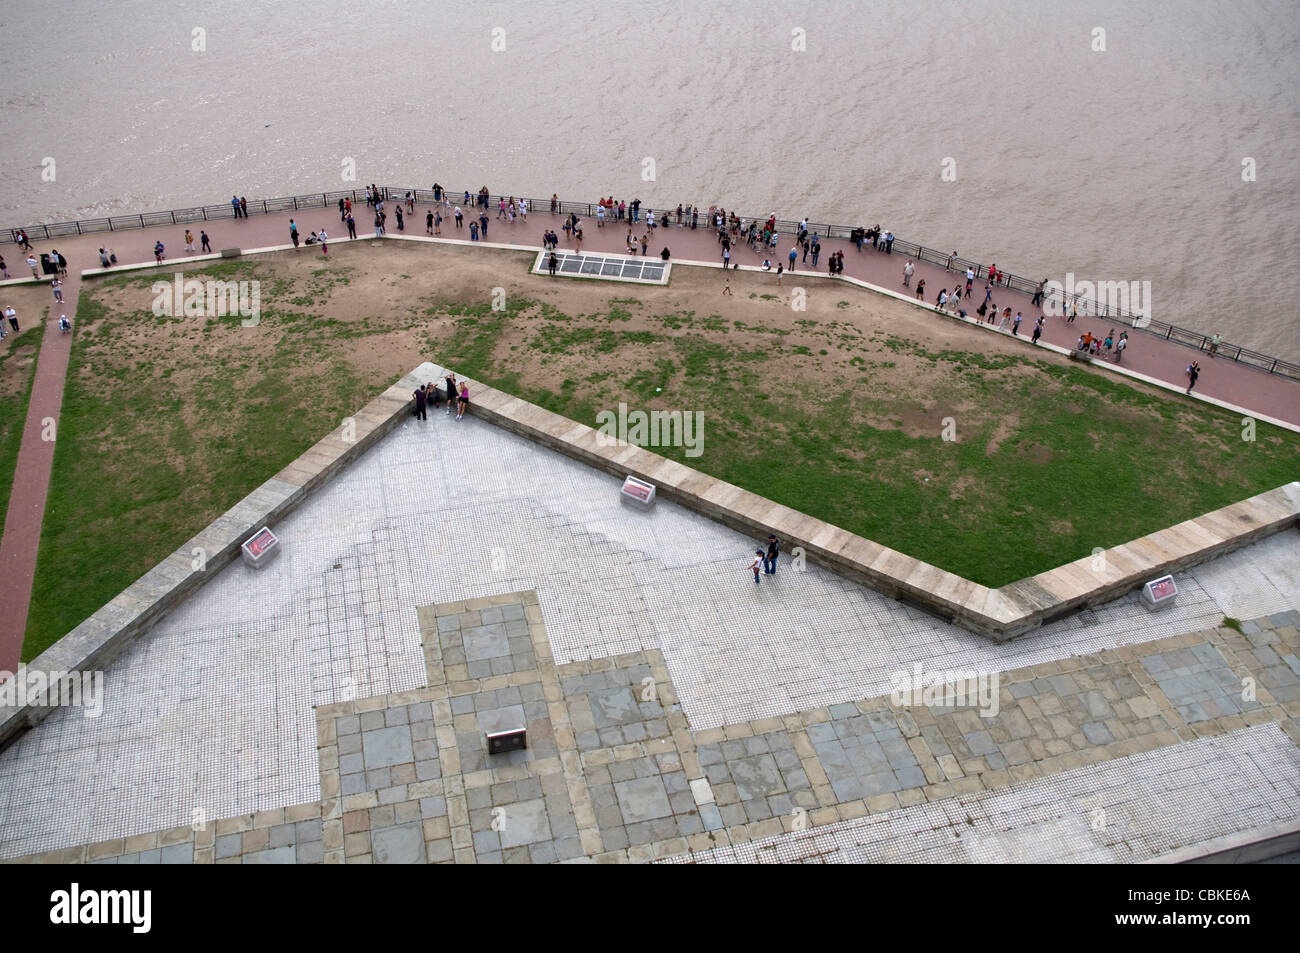 View from observation Level of the Statue of Liberty looking down on roof of star shaped Fort Wood and island promenade Stock Photo